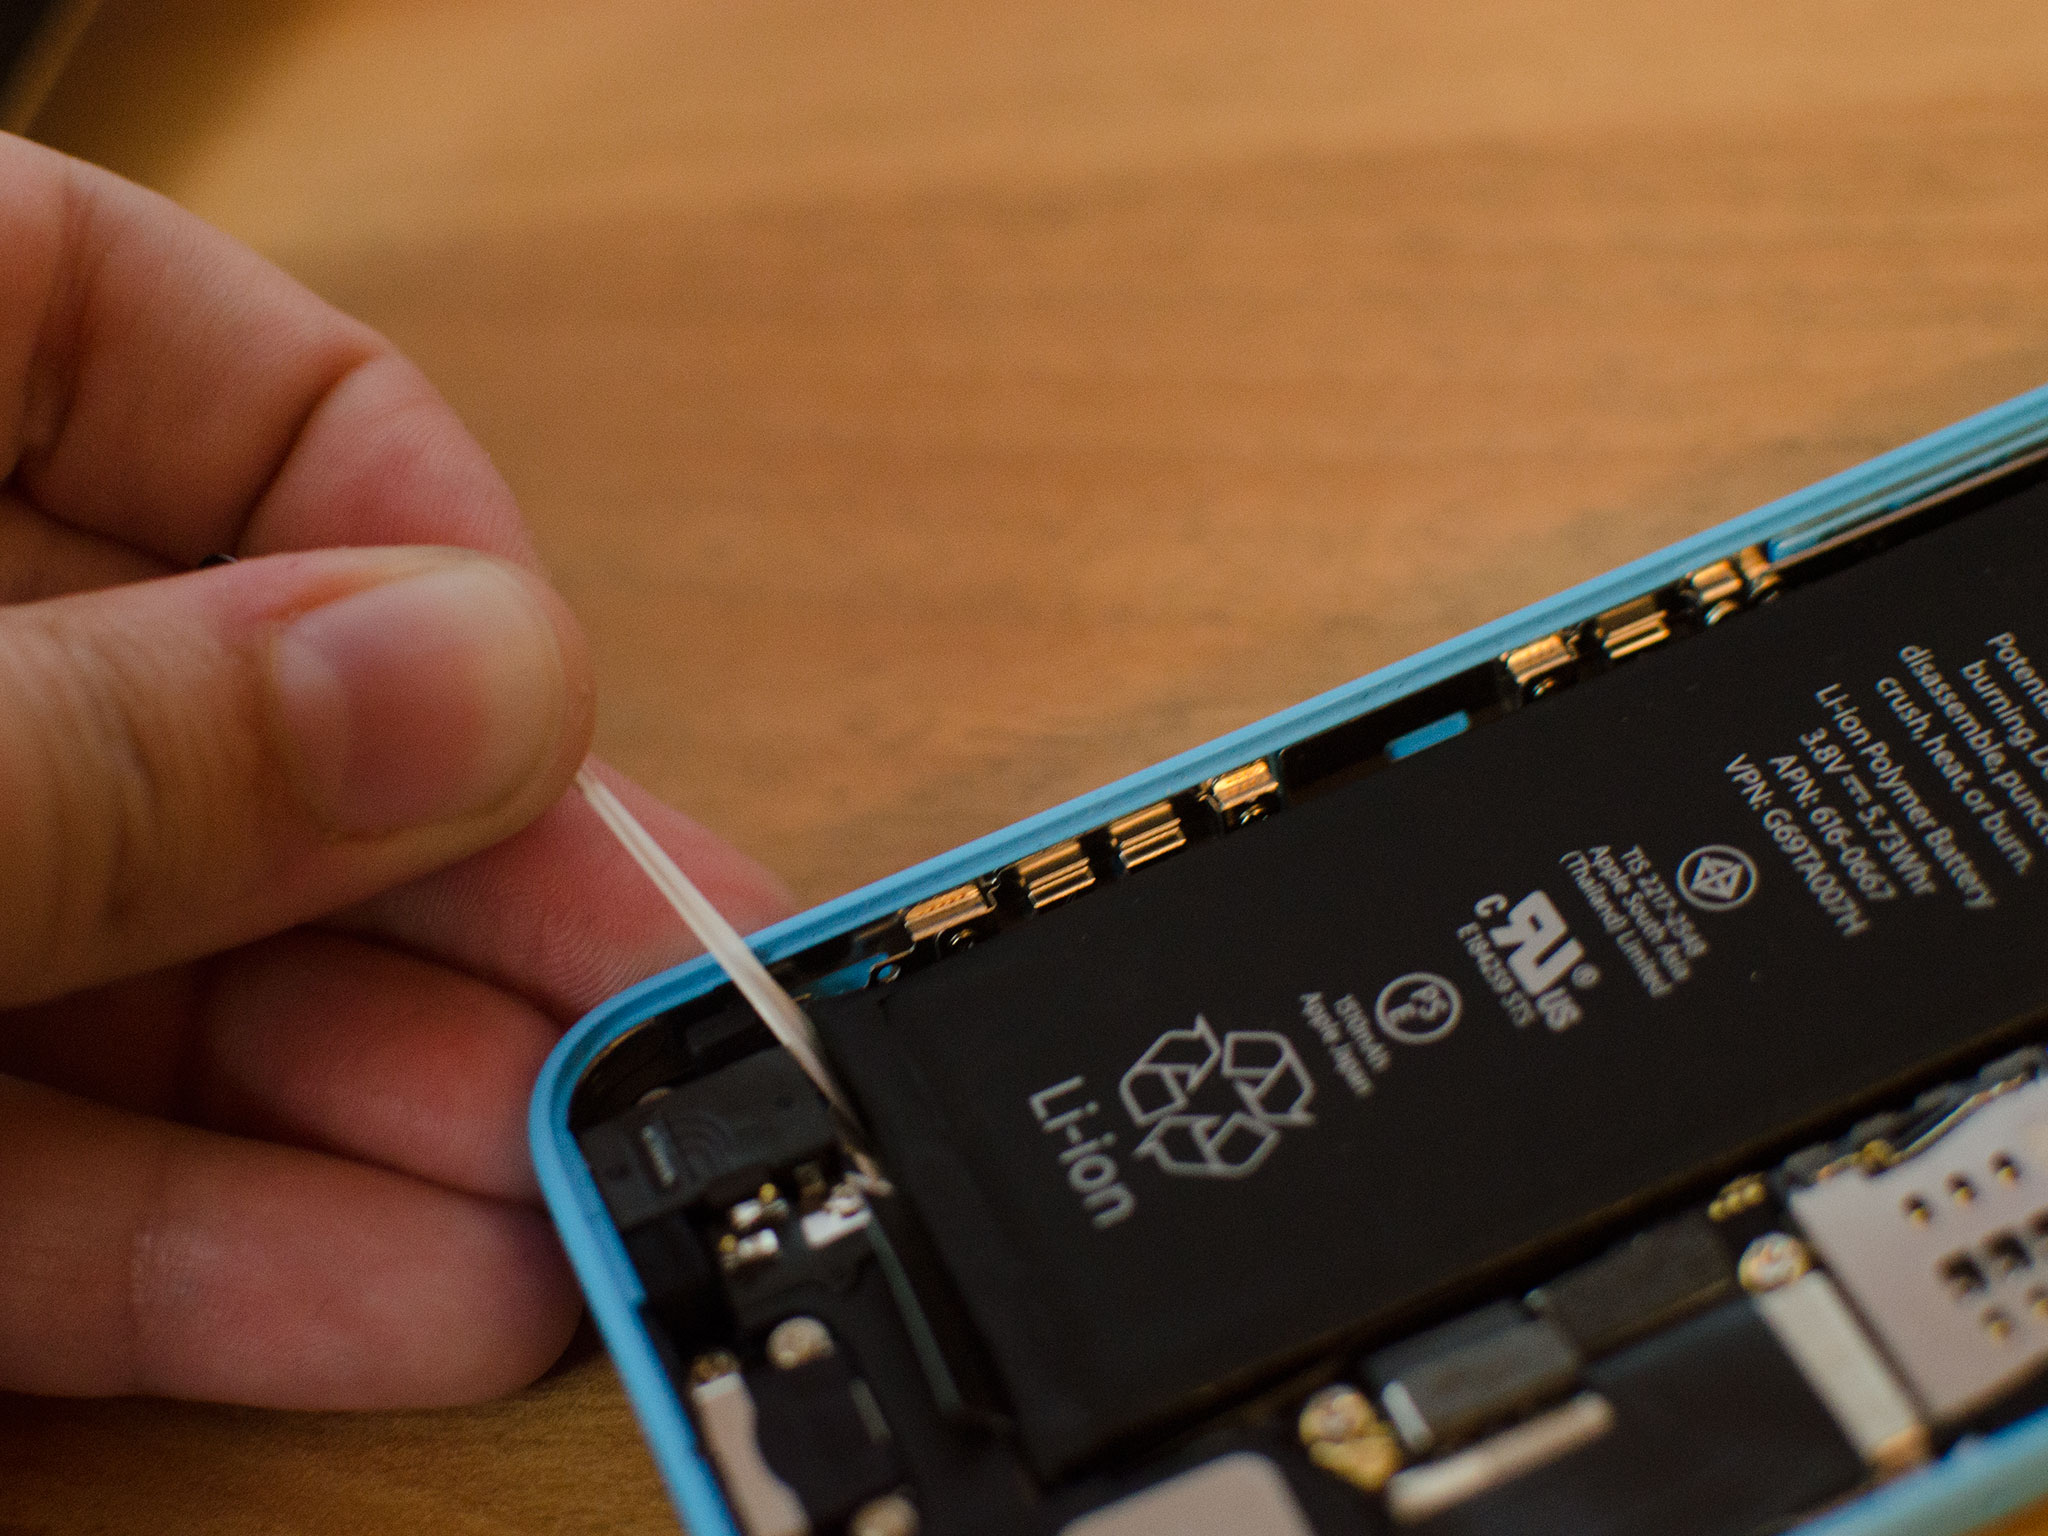 How to replace the battery in an iPhone 5c | iMore